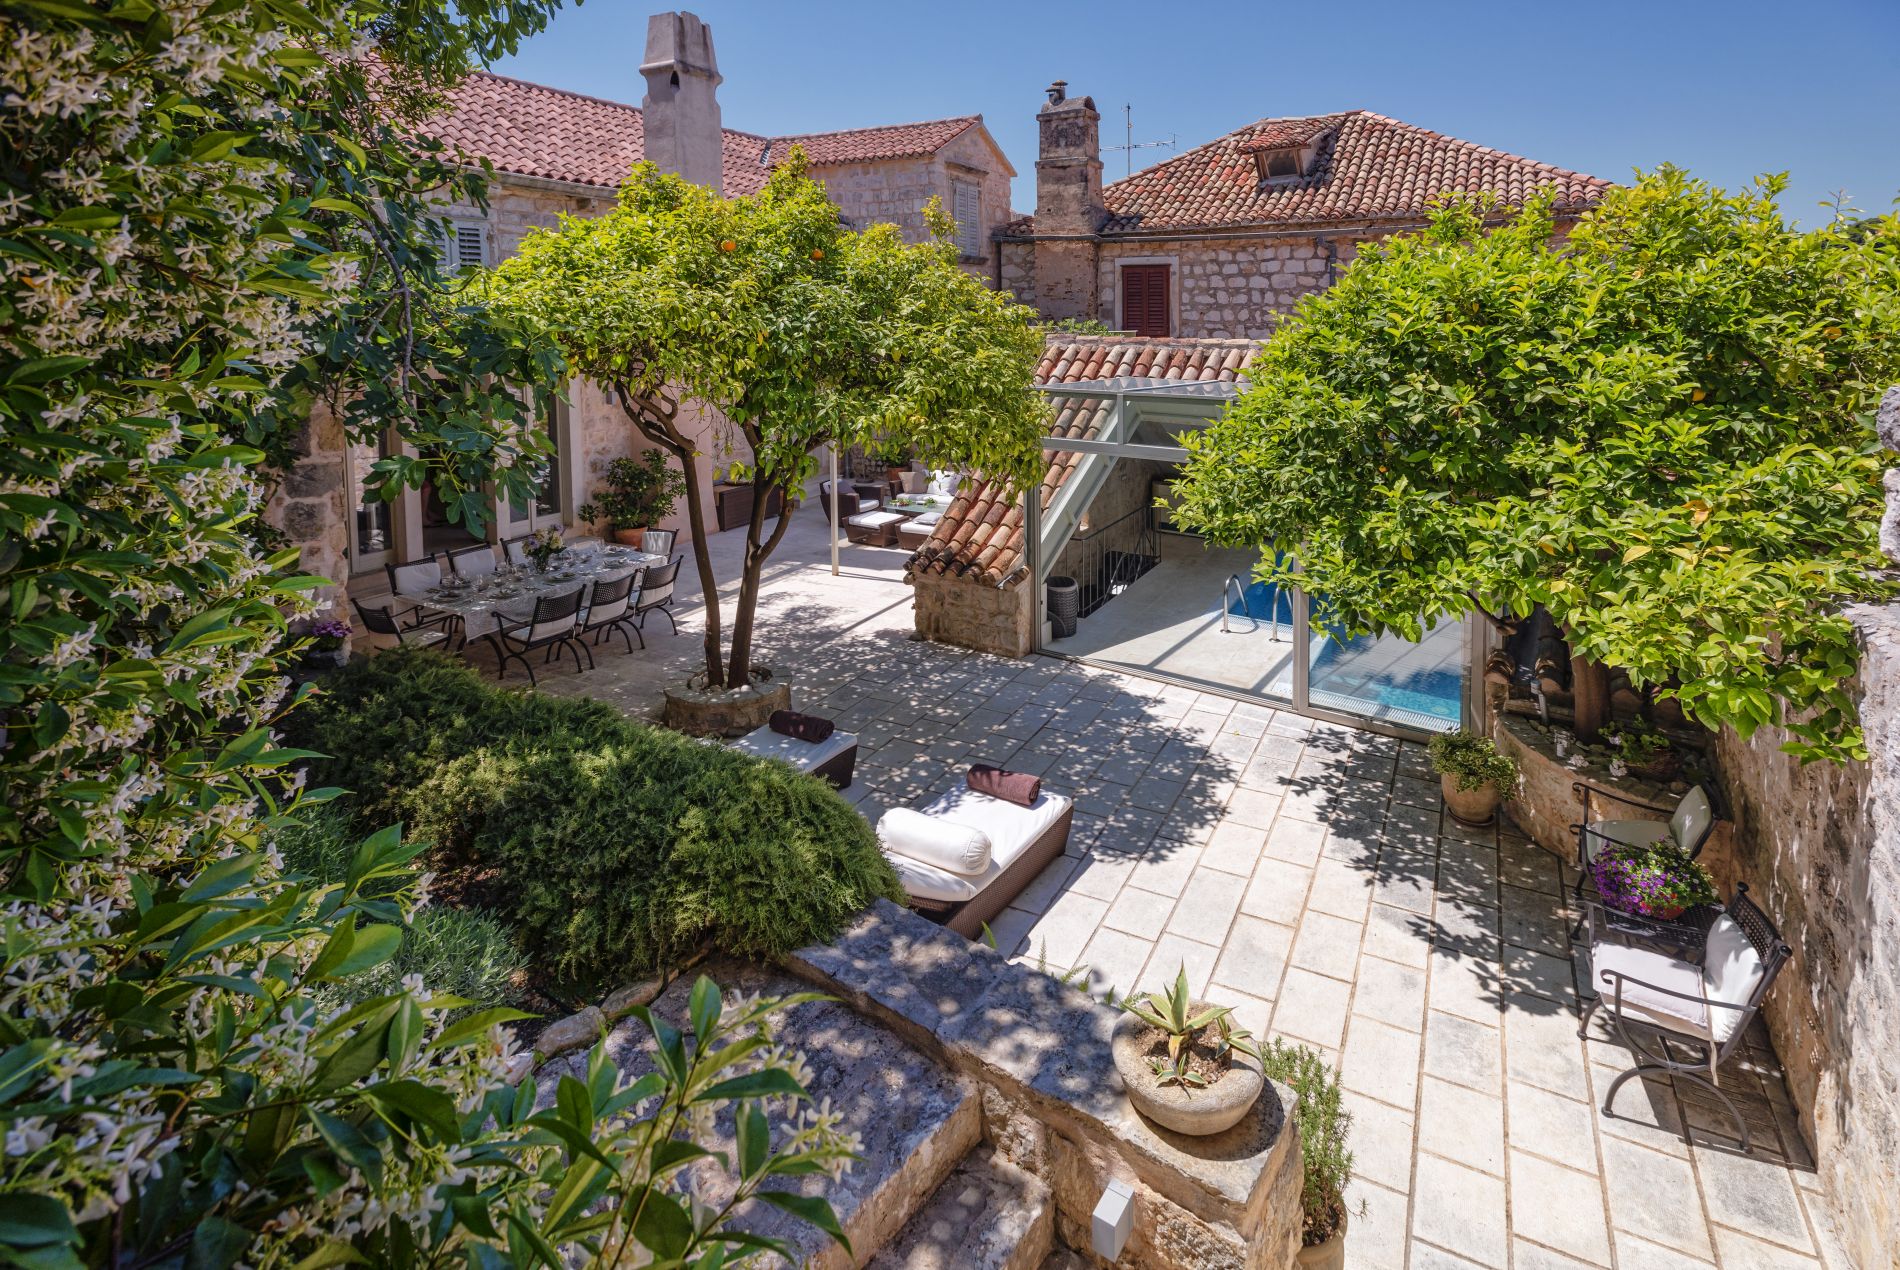 Private garden with seating area in shade of a luxury vacation villa Hvar with total privacy